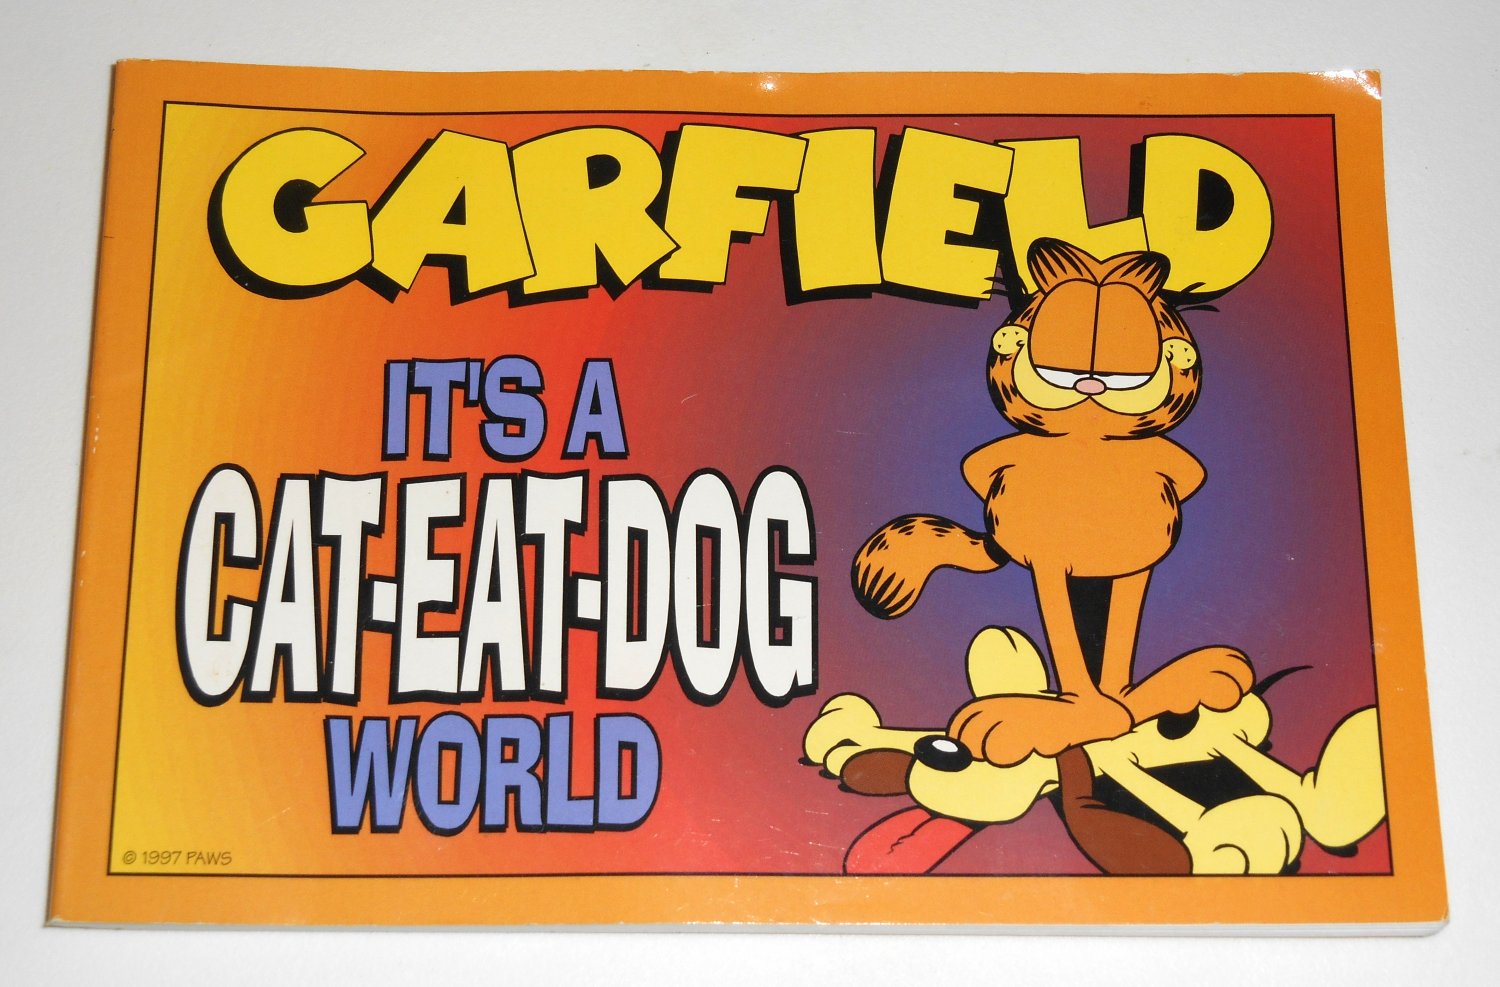 Garfield It's a Cat Eat Dog World Book Paperback Soft Cover Odie PAWS Jim Davis